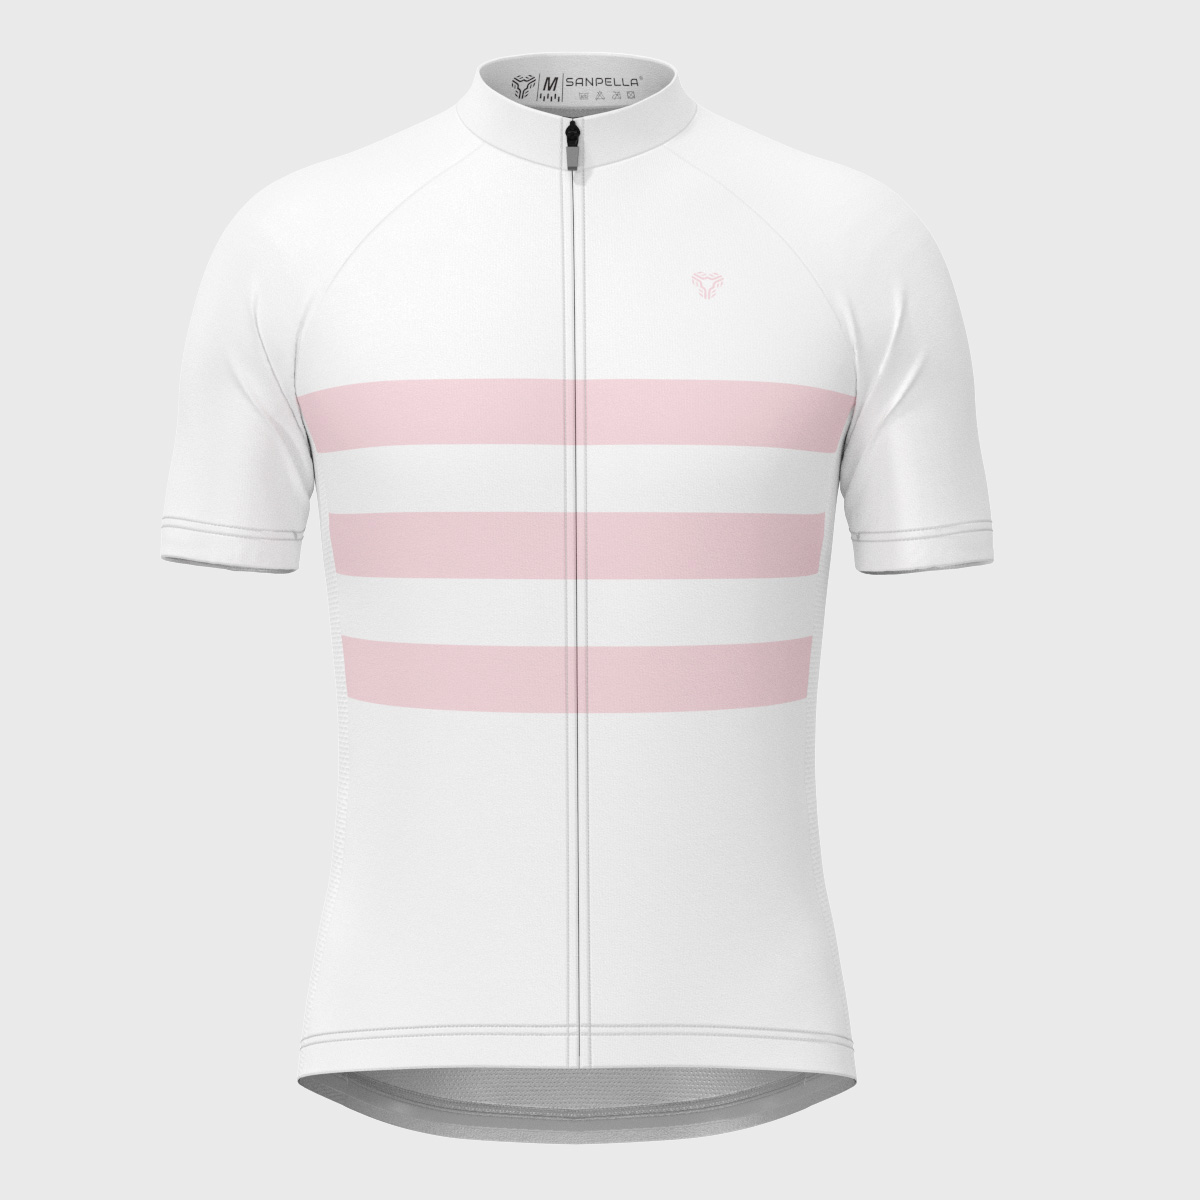 Men's Classic Stripes Cycling Jersey - White/Pink